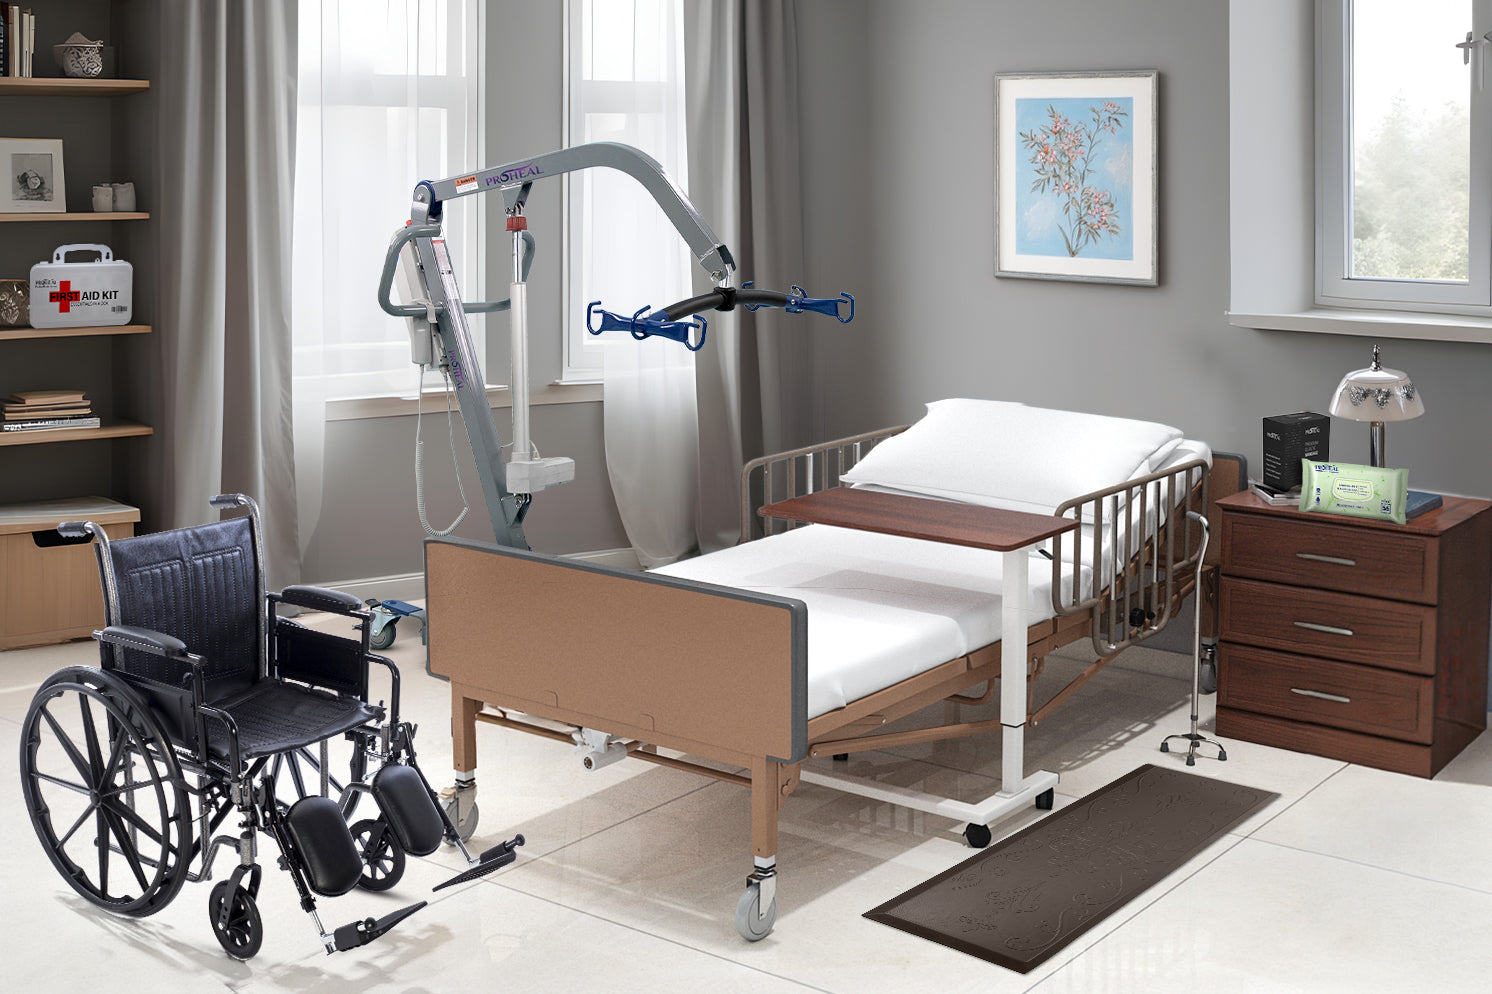 Cost-Effective Solutions for Healthcare Facilities